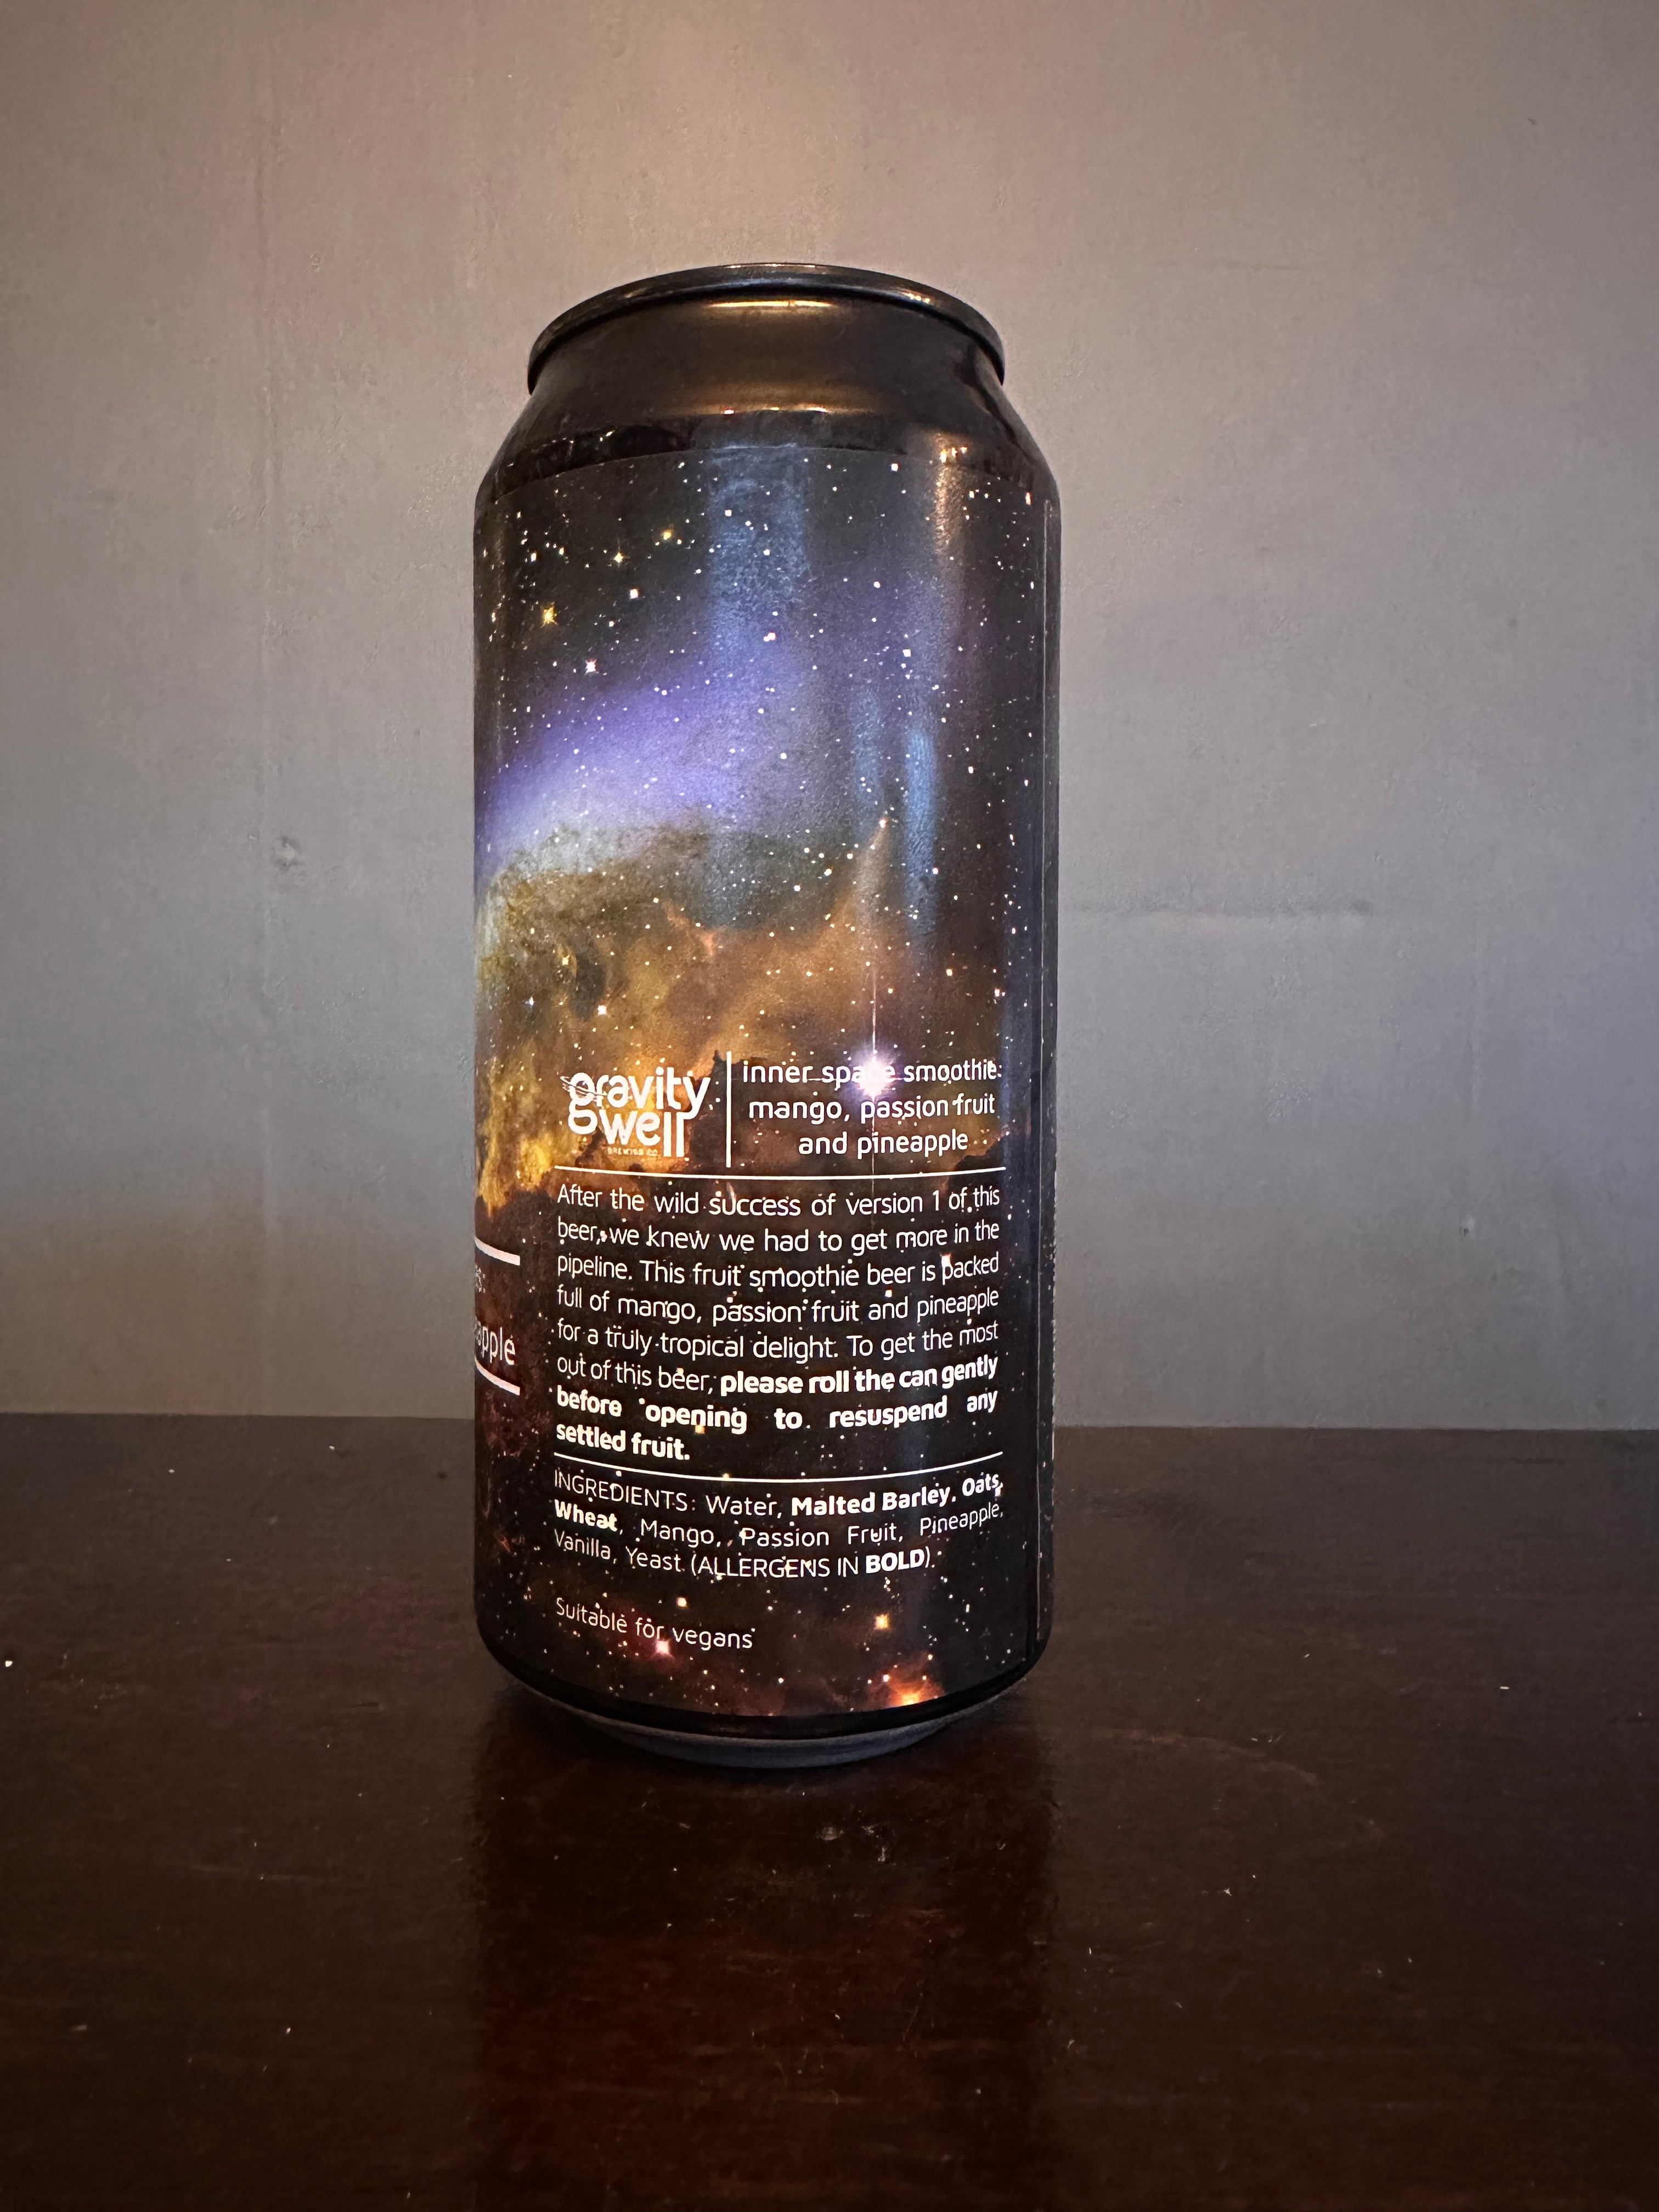 Gravity Well Inner Space Mango, Passion Fruit and Pineapple Smoothie Sour 5.5%